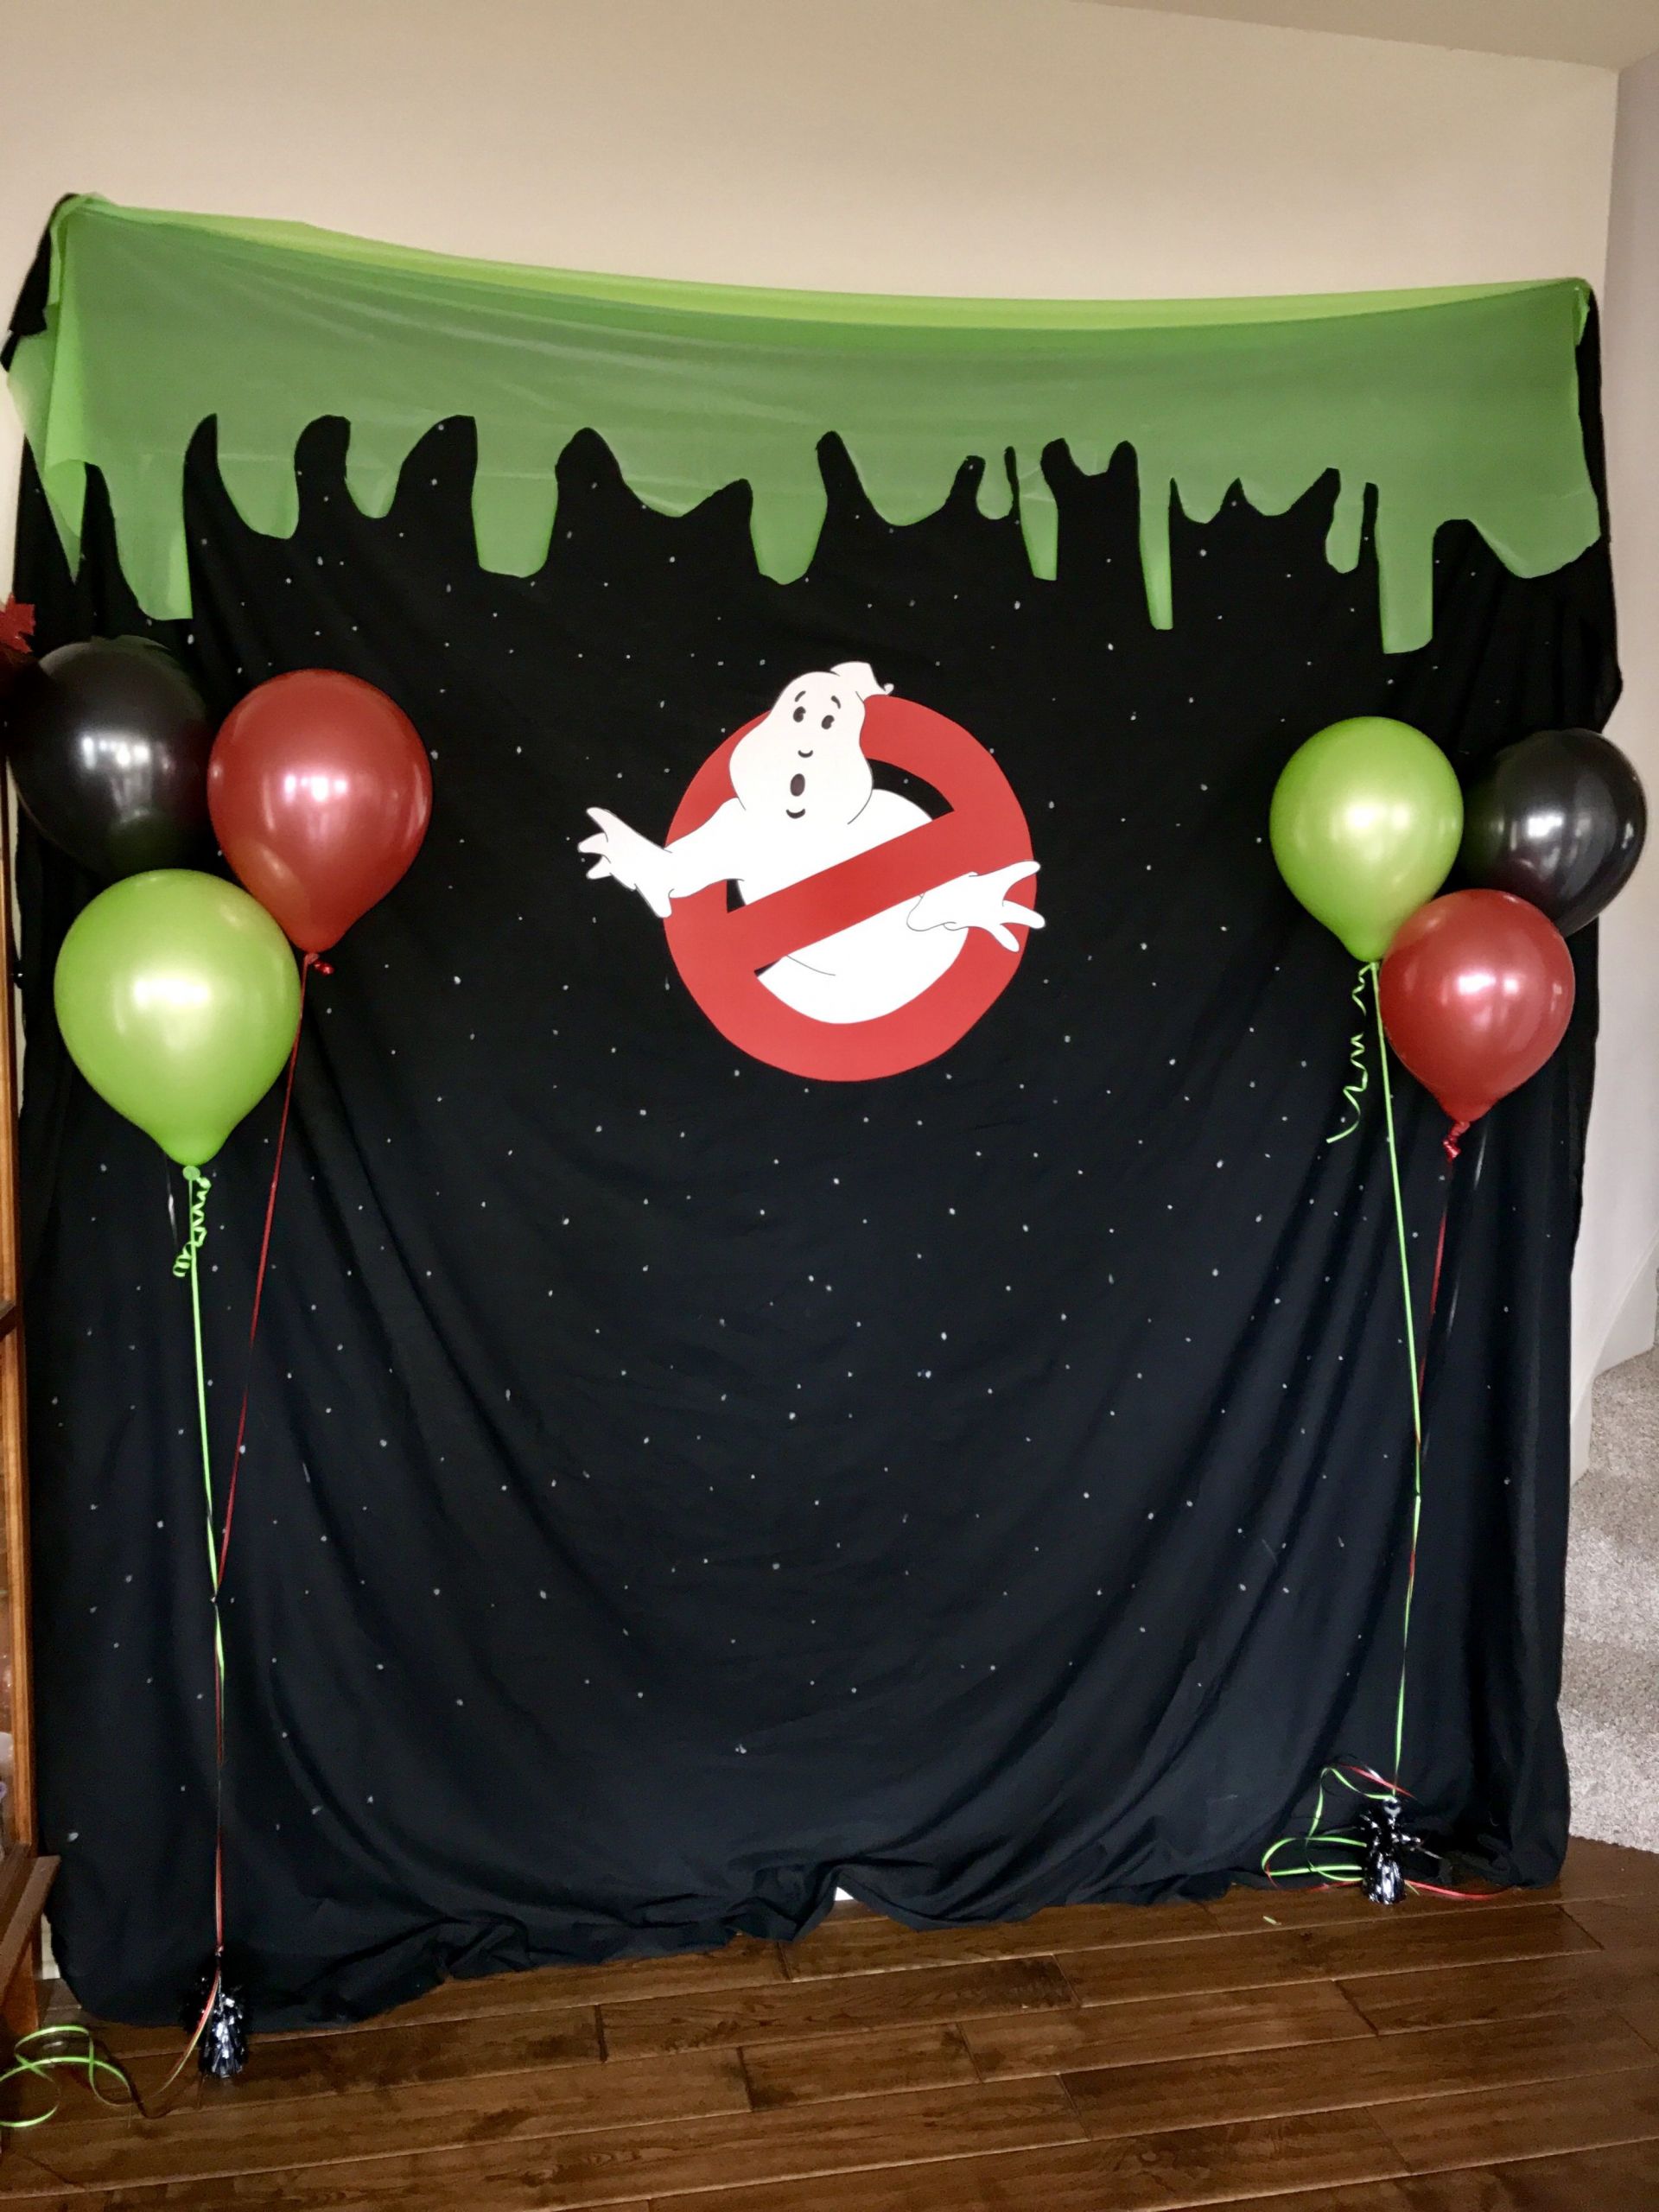 Halloween Party Photo Booth Ideas
 Ghostbuster birthday party photo booth I bought some